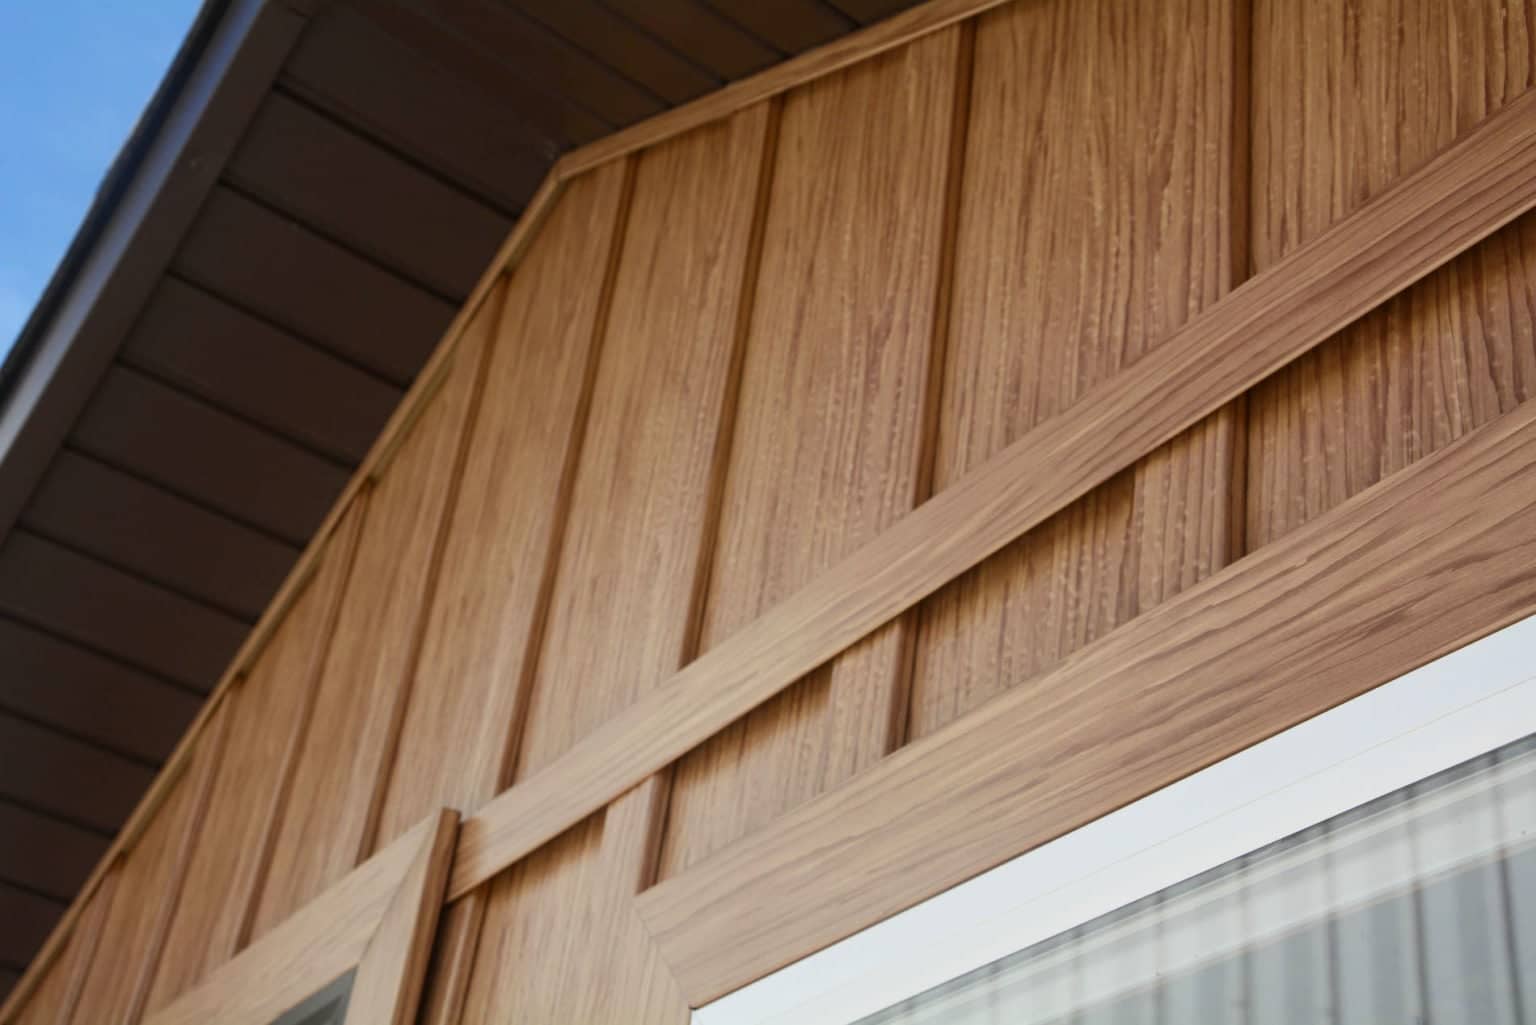 Board and Batten Siding: Everything You Need to Know